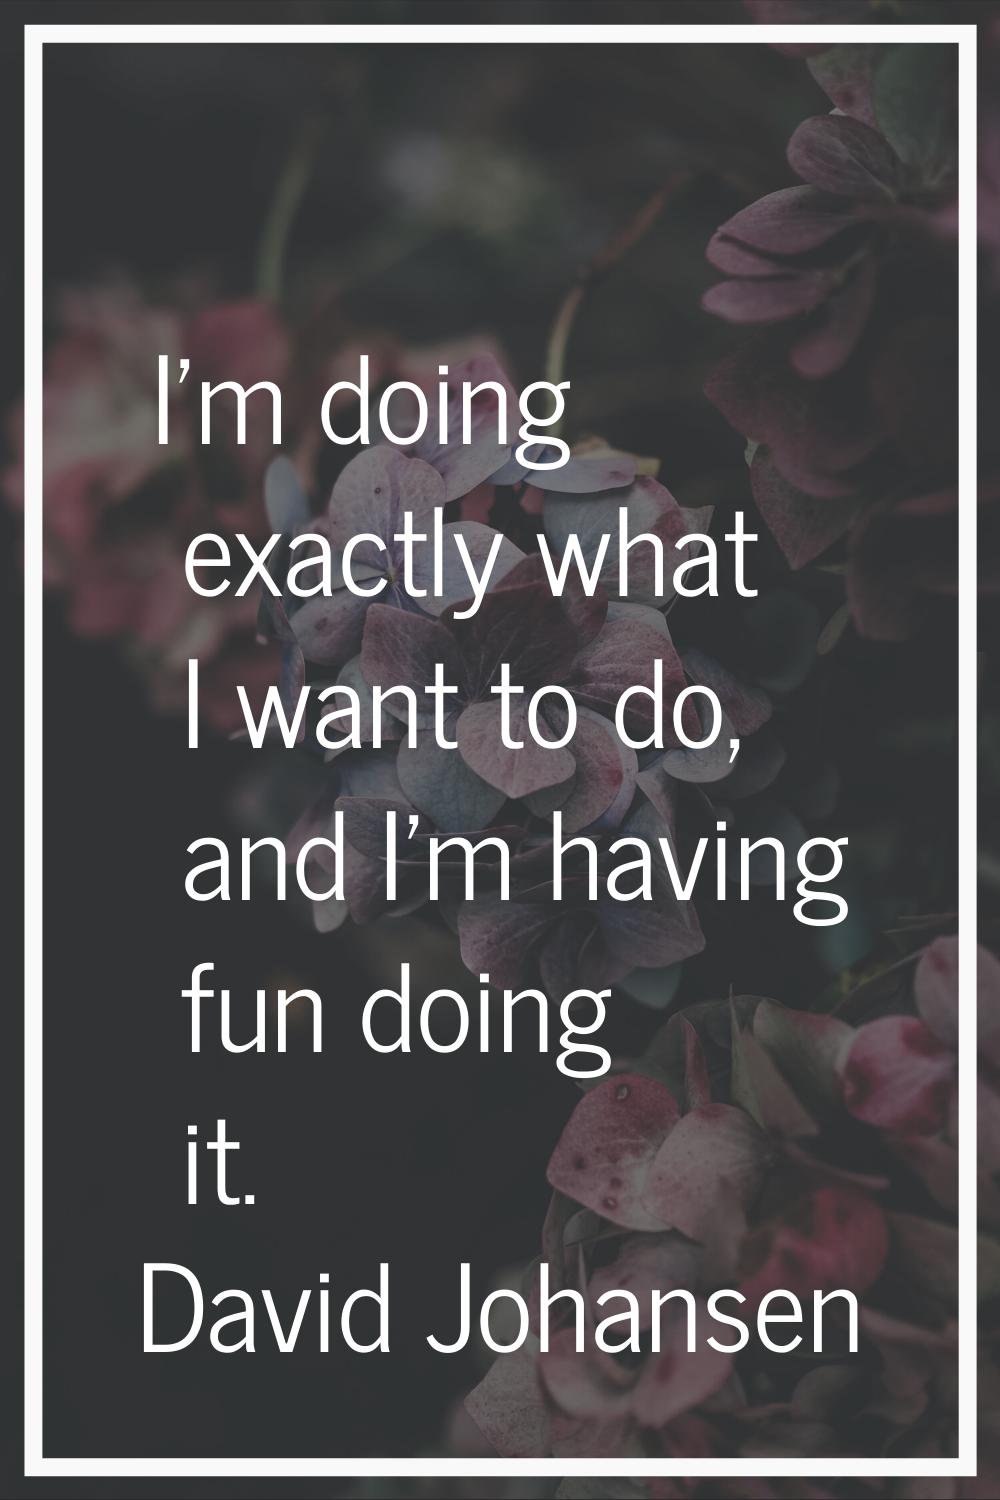 I'm doing exactly what I want to do, and I'm having fun doing it.